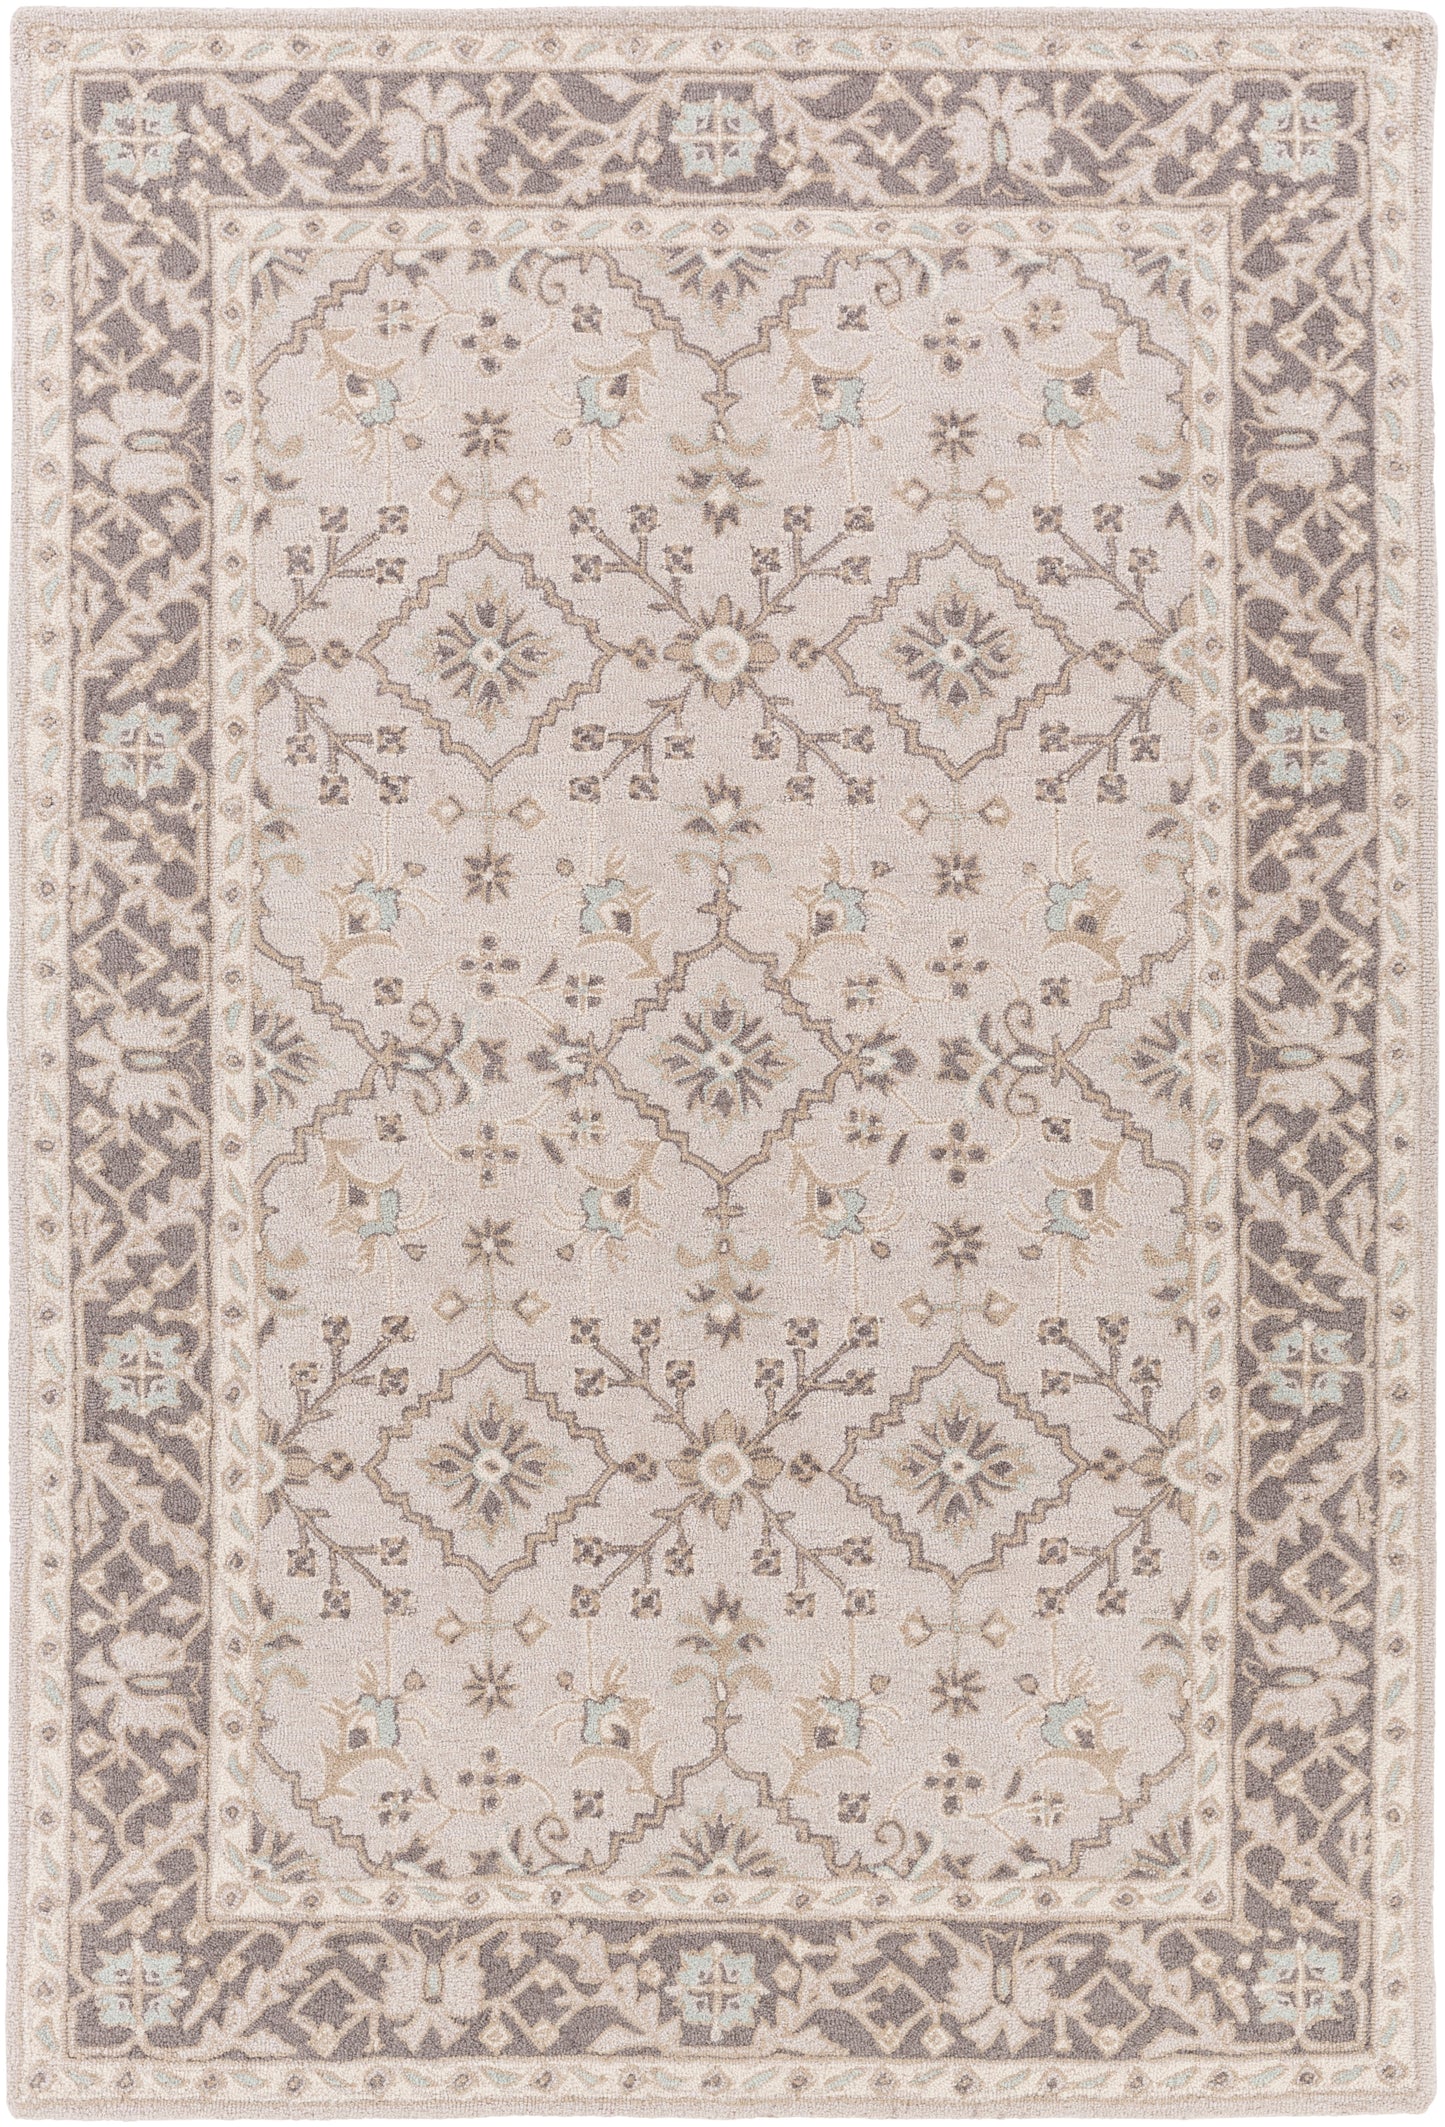 Castille 14886 Hand Tufted Wool Indoor Area Rug by Surya Rugs